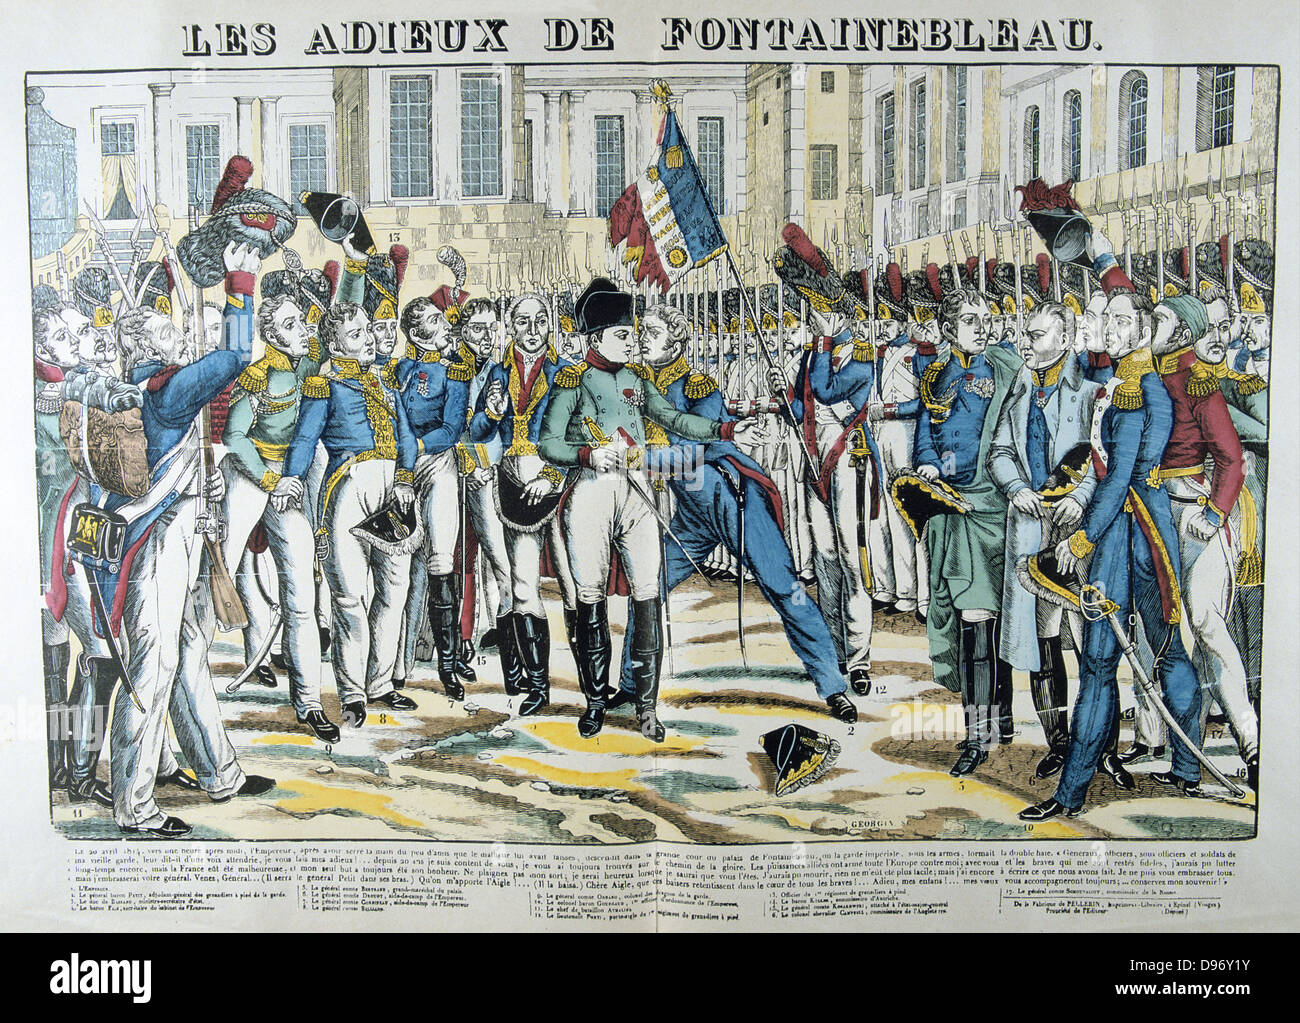 Napoleon I taking his leave at Fontainbleau of the Old Guard before going into exile on St Helena, 20 April 1814. 19th century French popular hand-coloured woodcut. Stock Photo